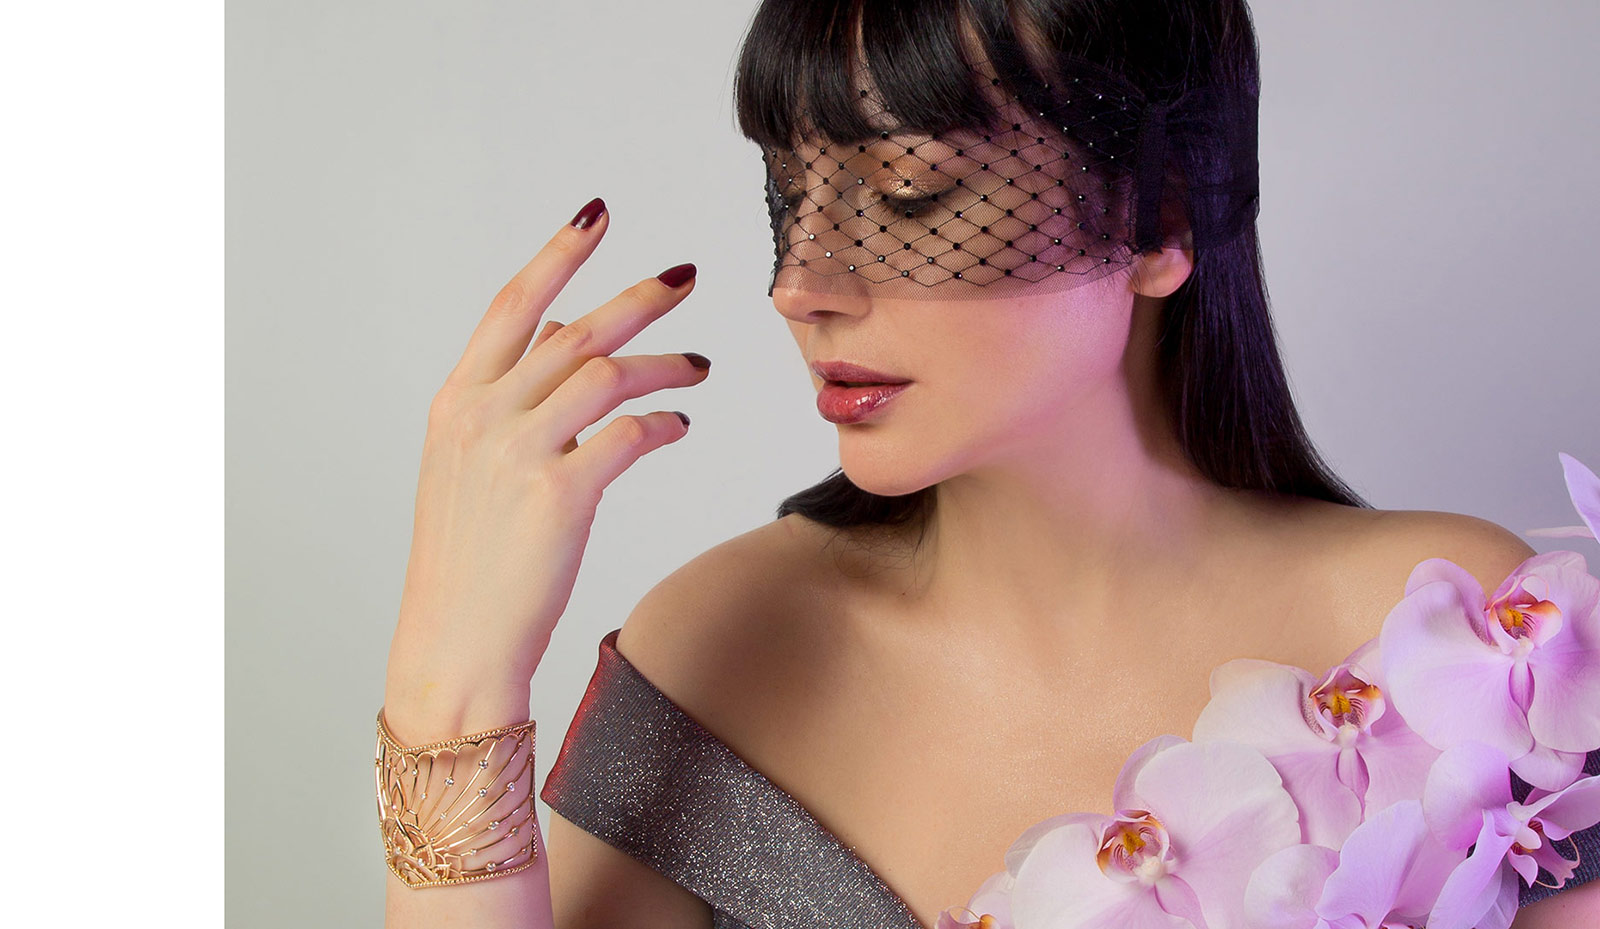 Katerina wears a dress by Promulias, a mask by Maison Close and the Grand Soir cuff by Maison Veyret